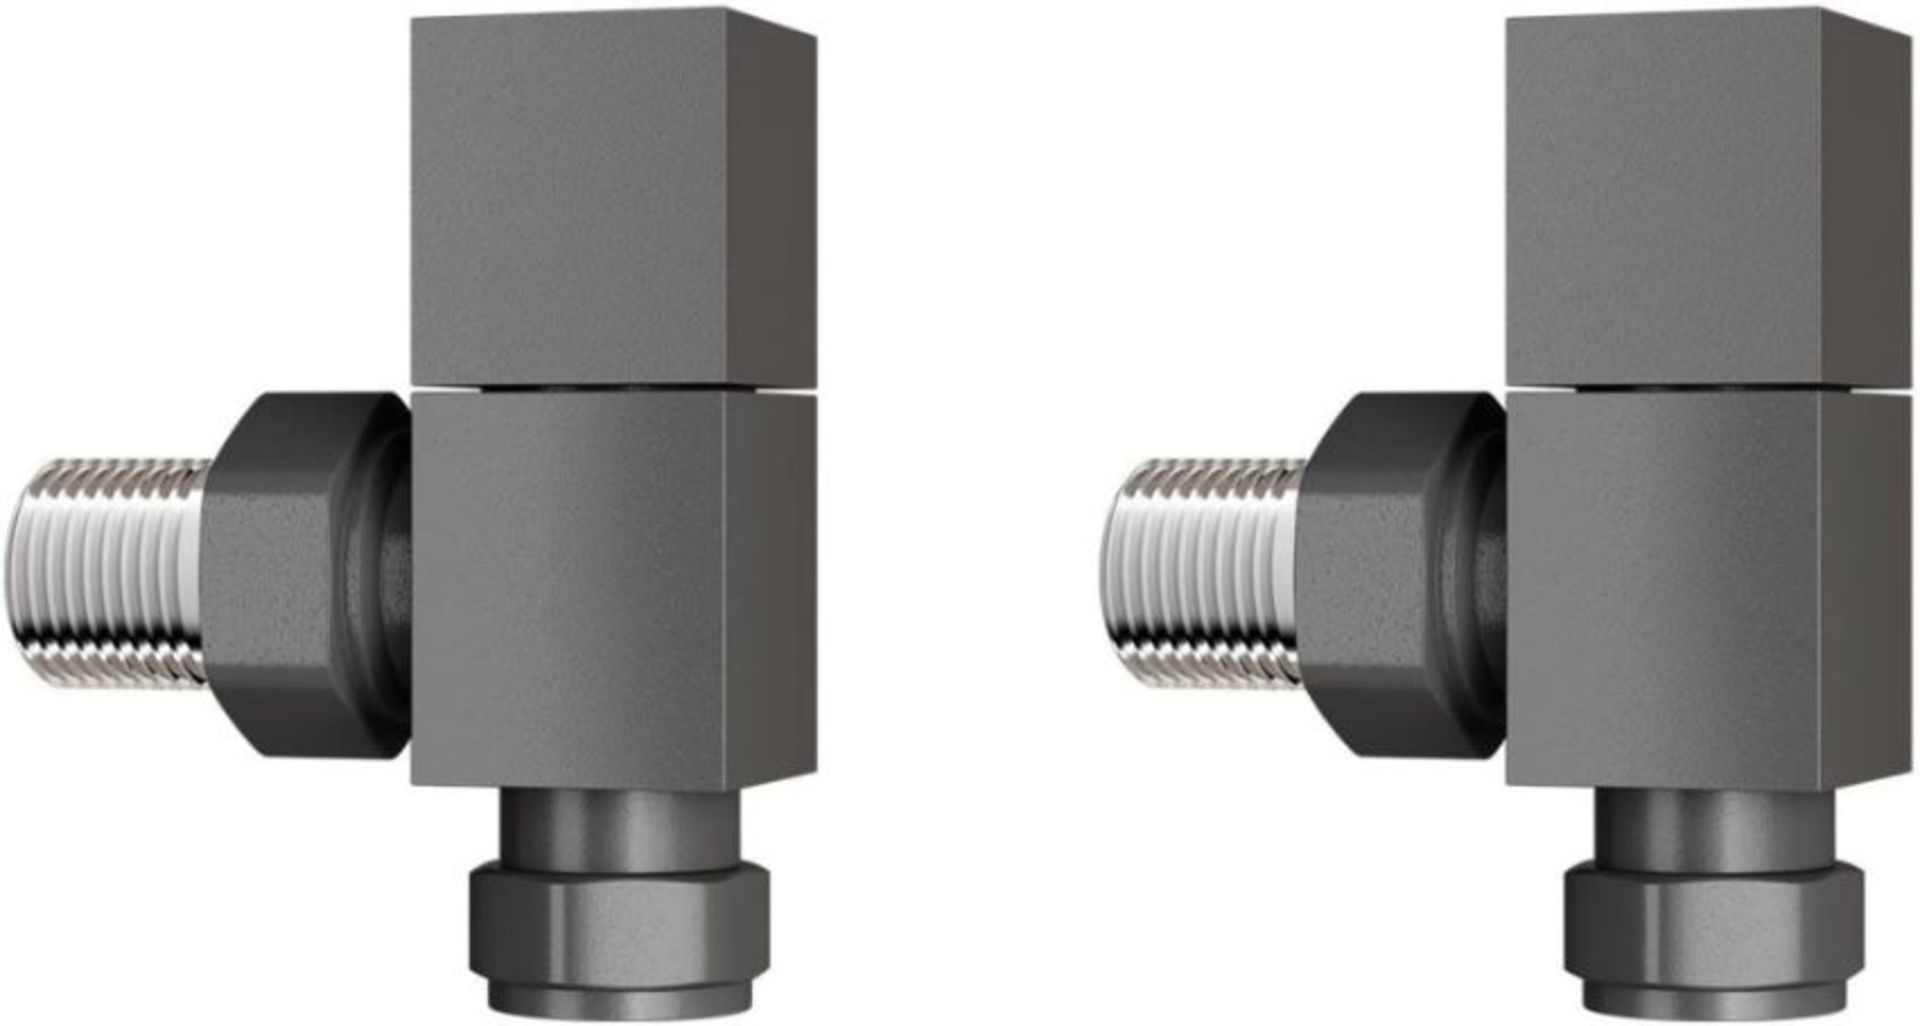 New & Boxed 15 mm Standard Connection Square Angled Anthracite Radiator Valves. Ra03A. Compli...